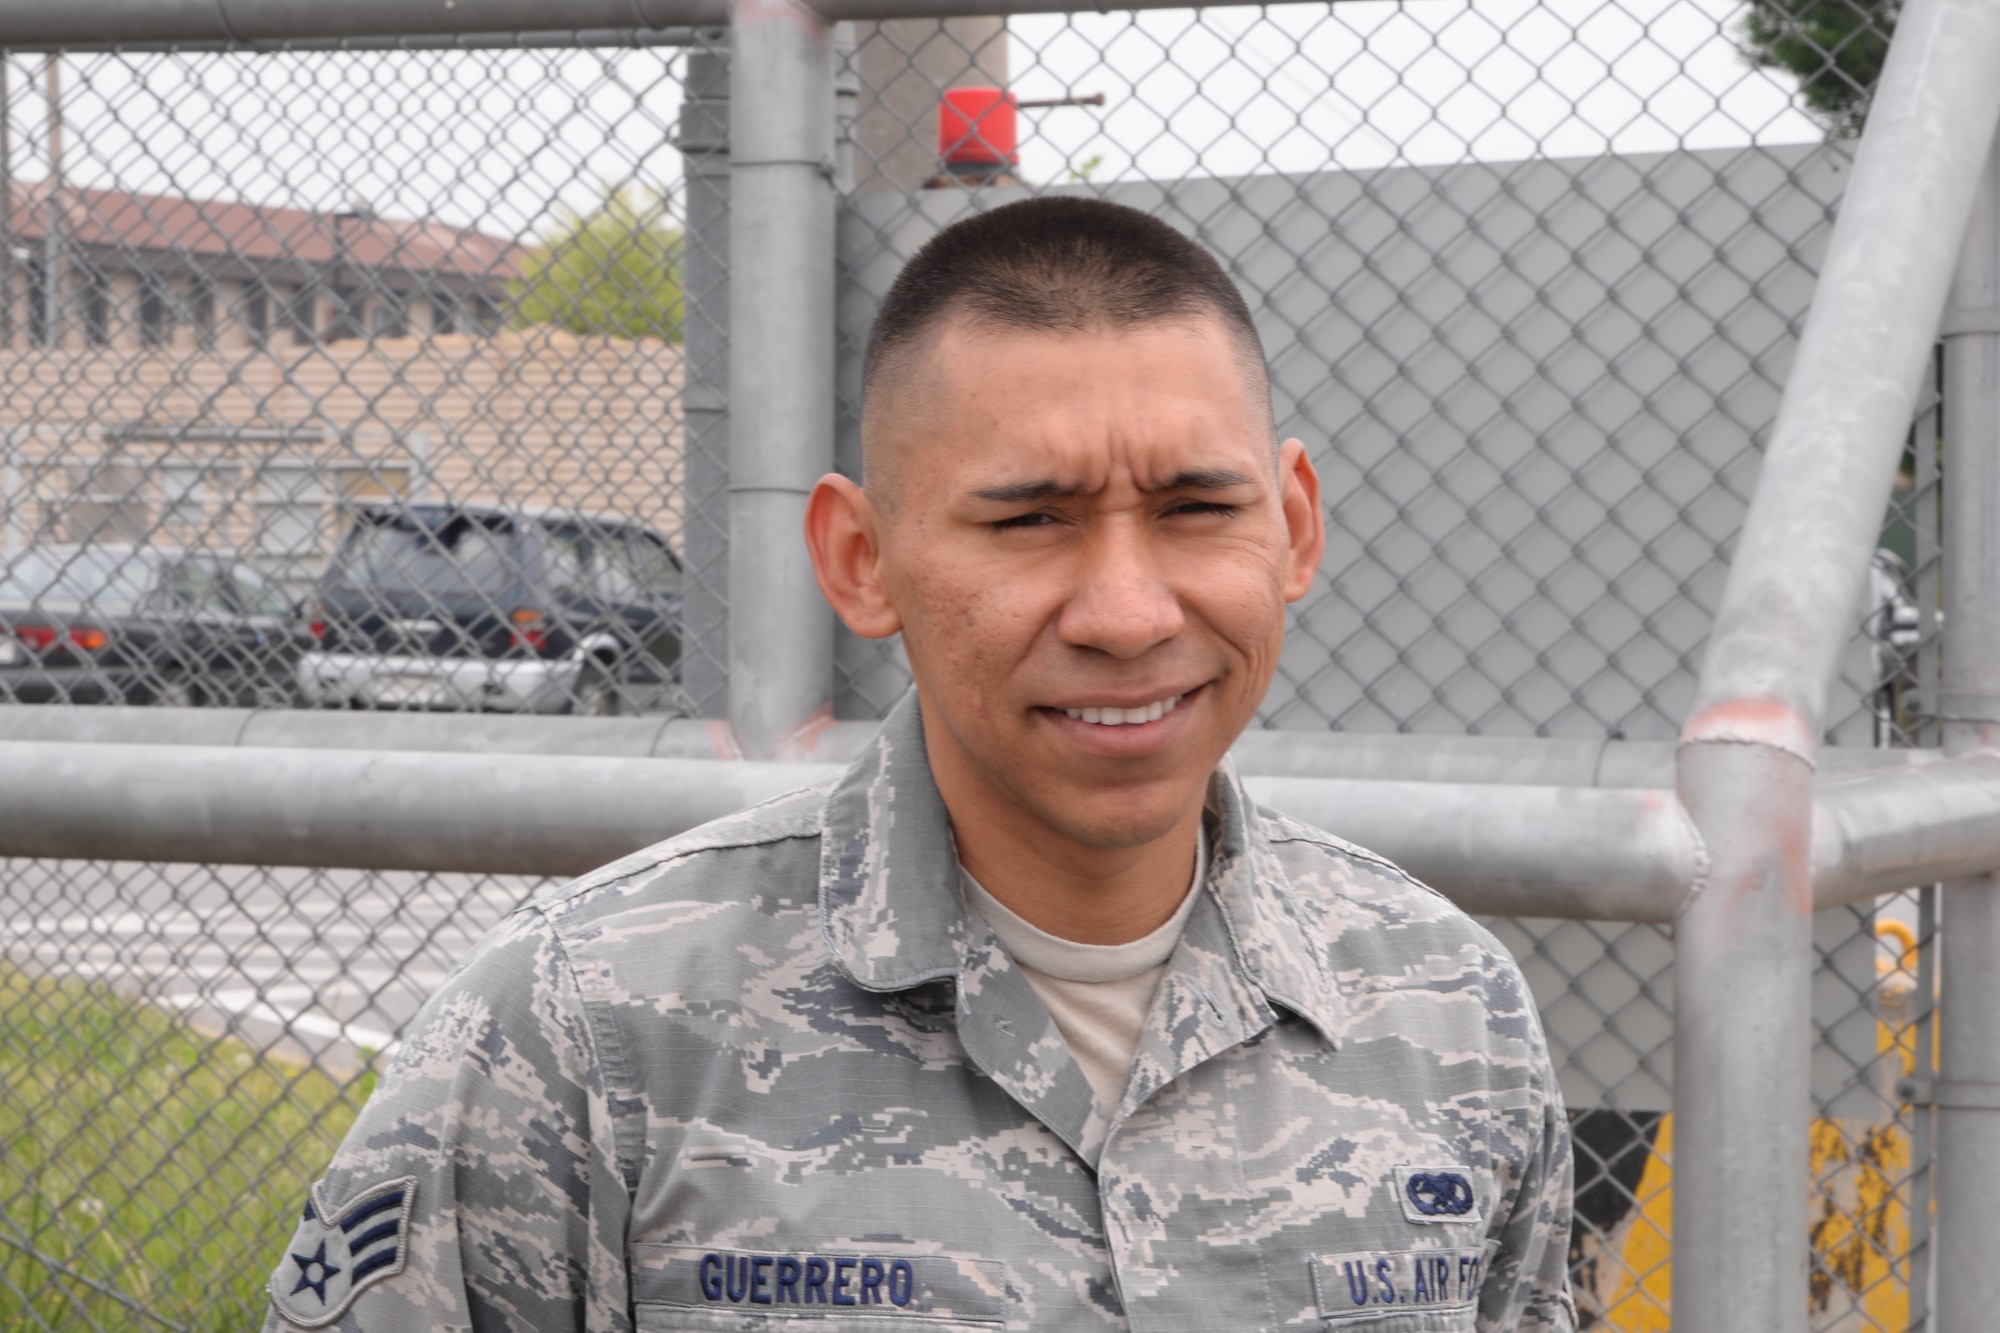 Senior Airman Angel Guerrero, 36th Aircraft Maintenance Unit aircraft cannibalization manager, poses for a photo May 1, 2015, at Osan Air Base Republic of Korea. Guerrero was chosen as a Team Osan Spotlight award winner. Individuals who are chosen for this spotlight recognition are distinguished as consistent, superior performers within their squadrons. (U.S. Air Force photo by Staff Sgt. Benjamin Sutton/Released)